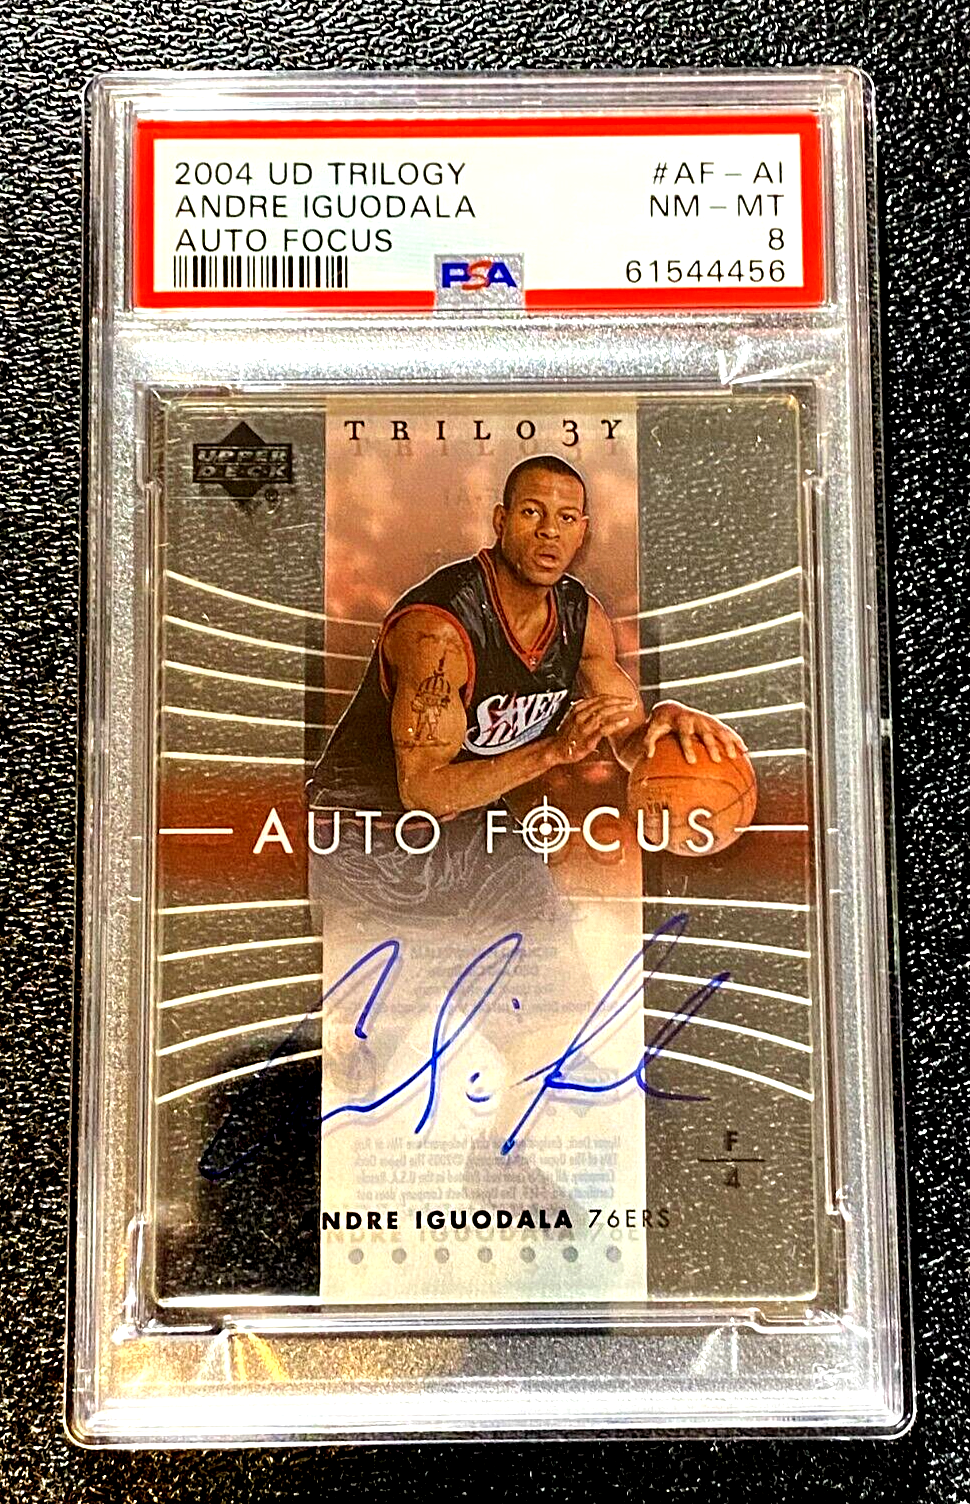 PSA 8 NMMT 2004 ANDRE IGUODALA RC AUTO FOCUS CLEAR ROOKIE CARD G4014R38E3522. rookie card picture